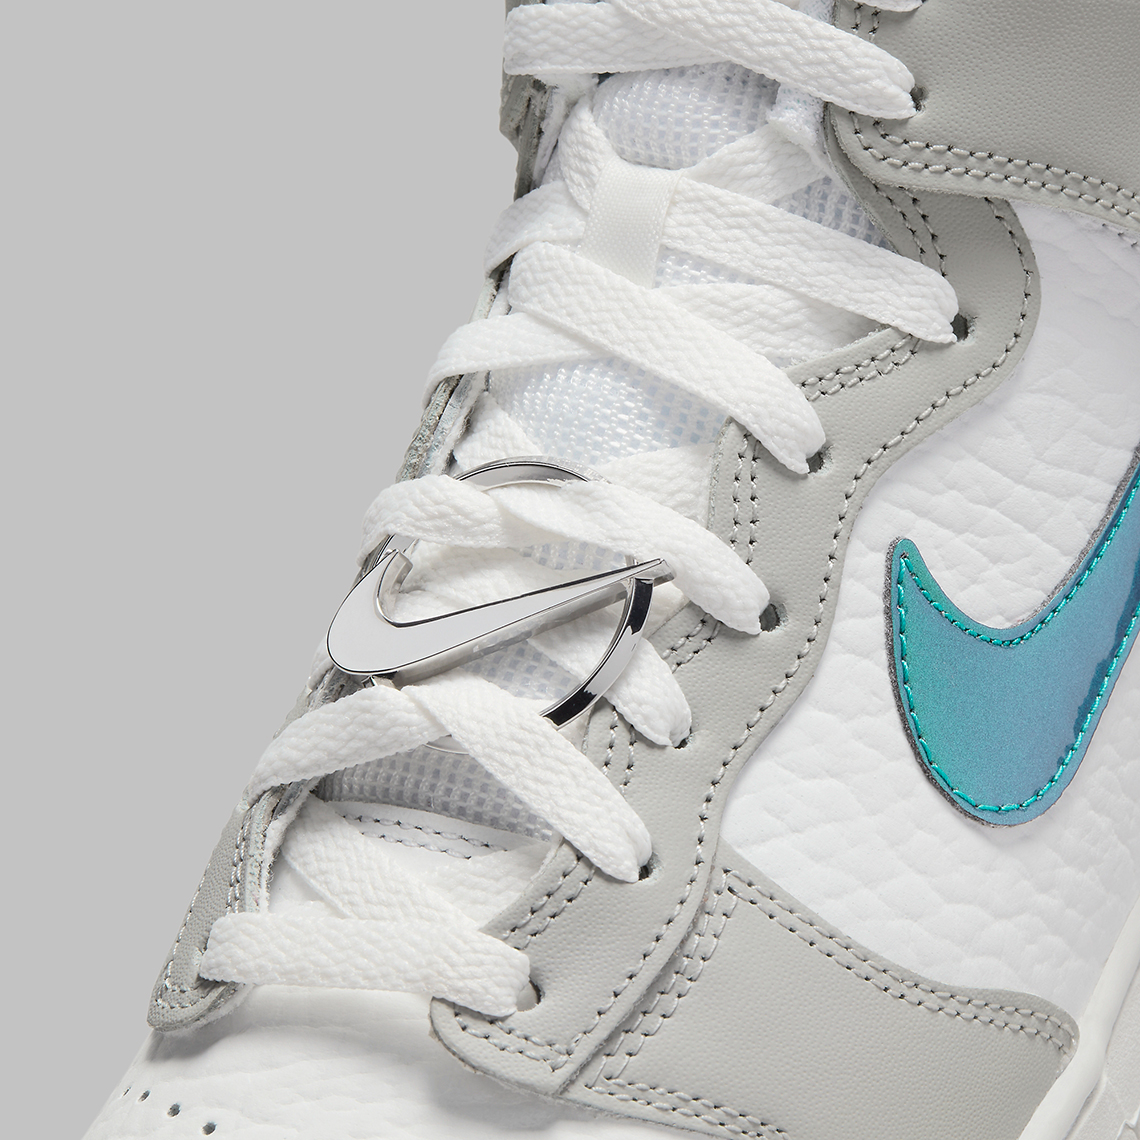 nike dunk high white grey turquoise DR7855 100 3